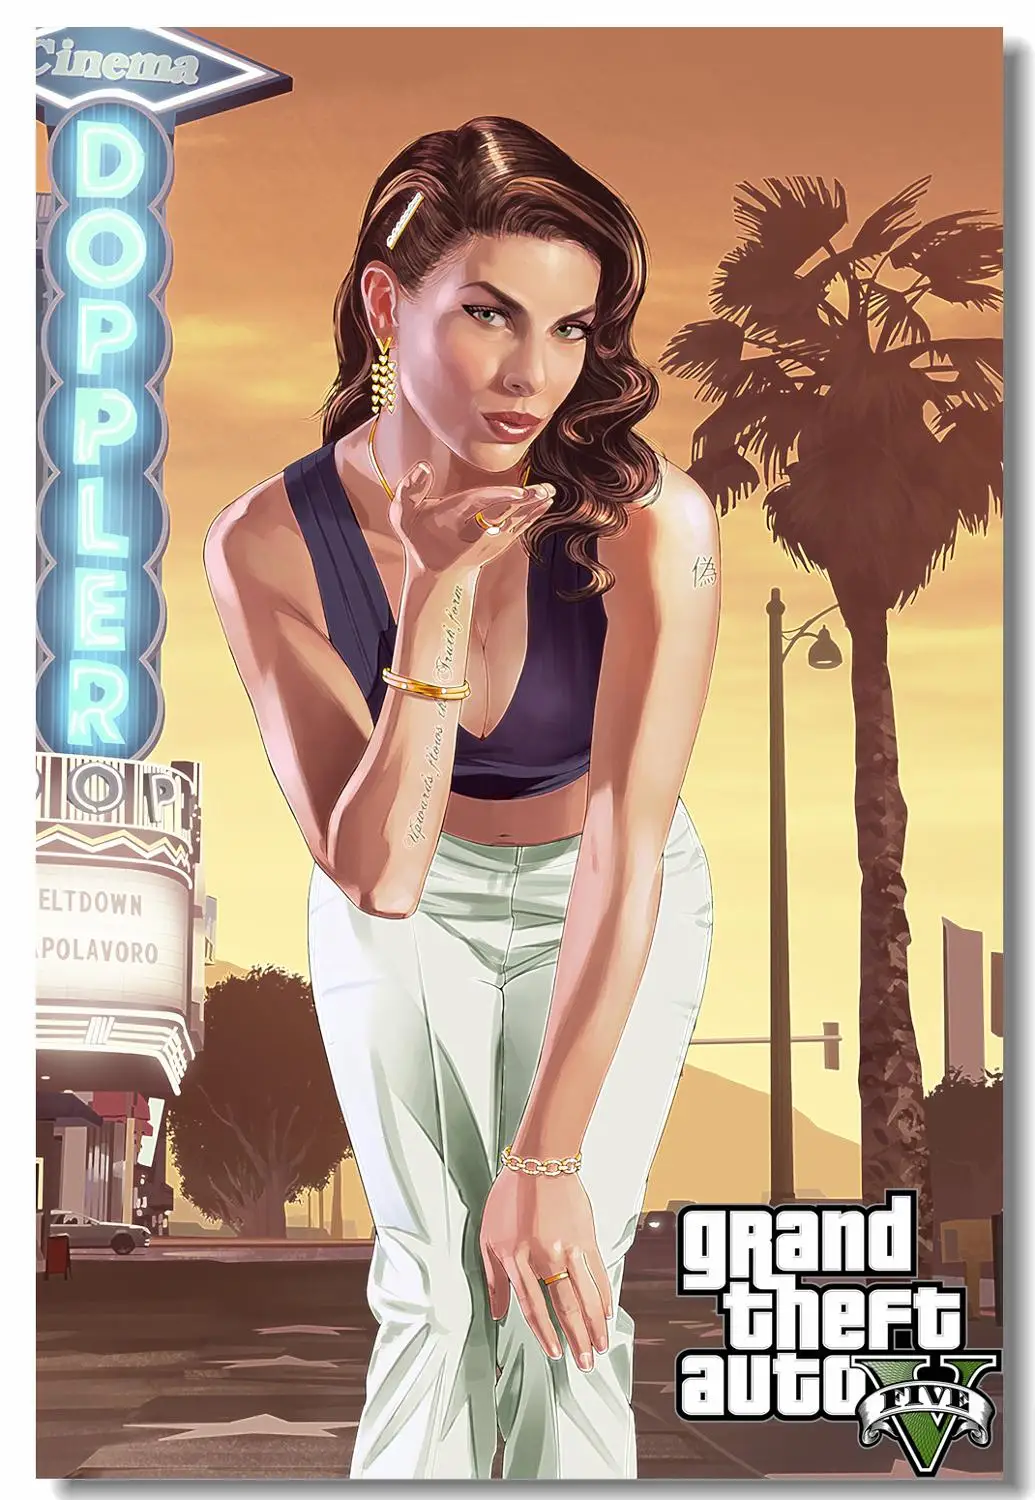 Custom Canvas Art Grand Theft Auto Poster Gta San Andreas Game Wallpaper  Sexy Woman Wall Stickers Mural Bedroom Decoration #788# - Wall Stickers -  AliExpress